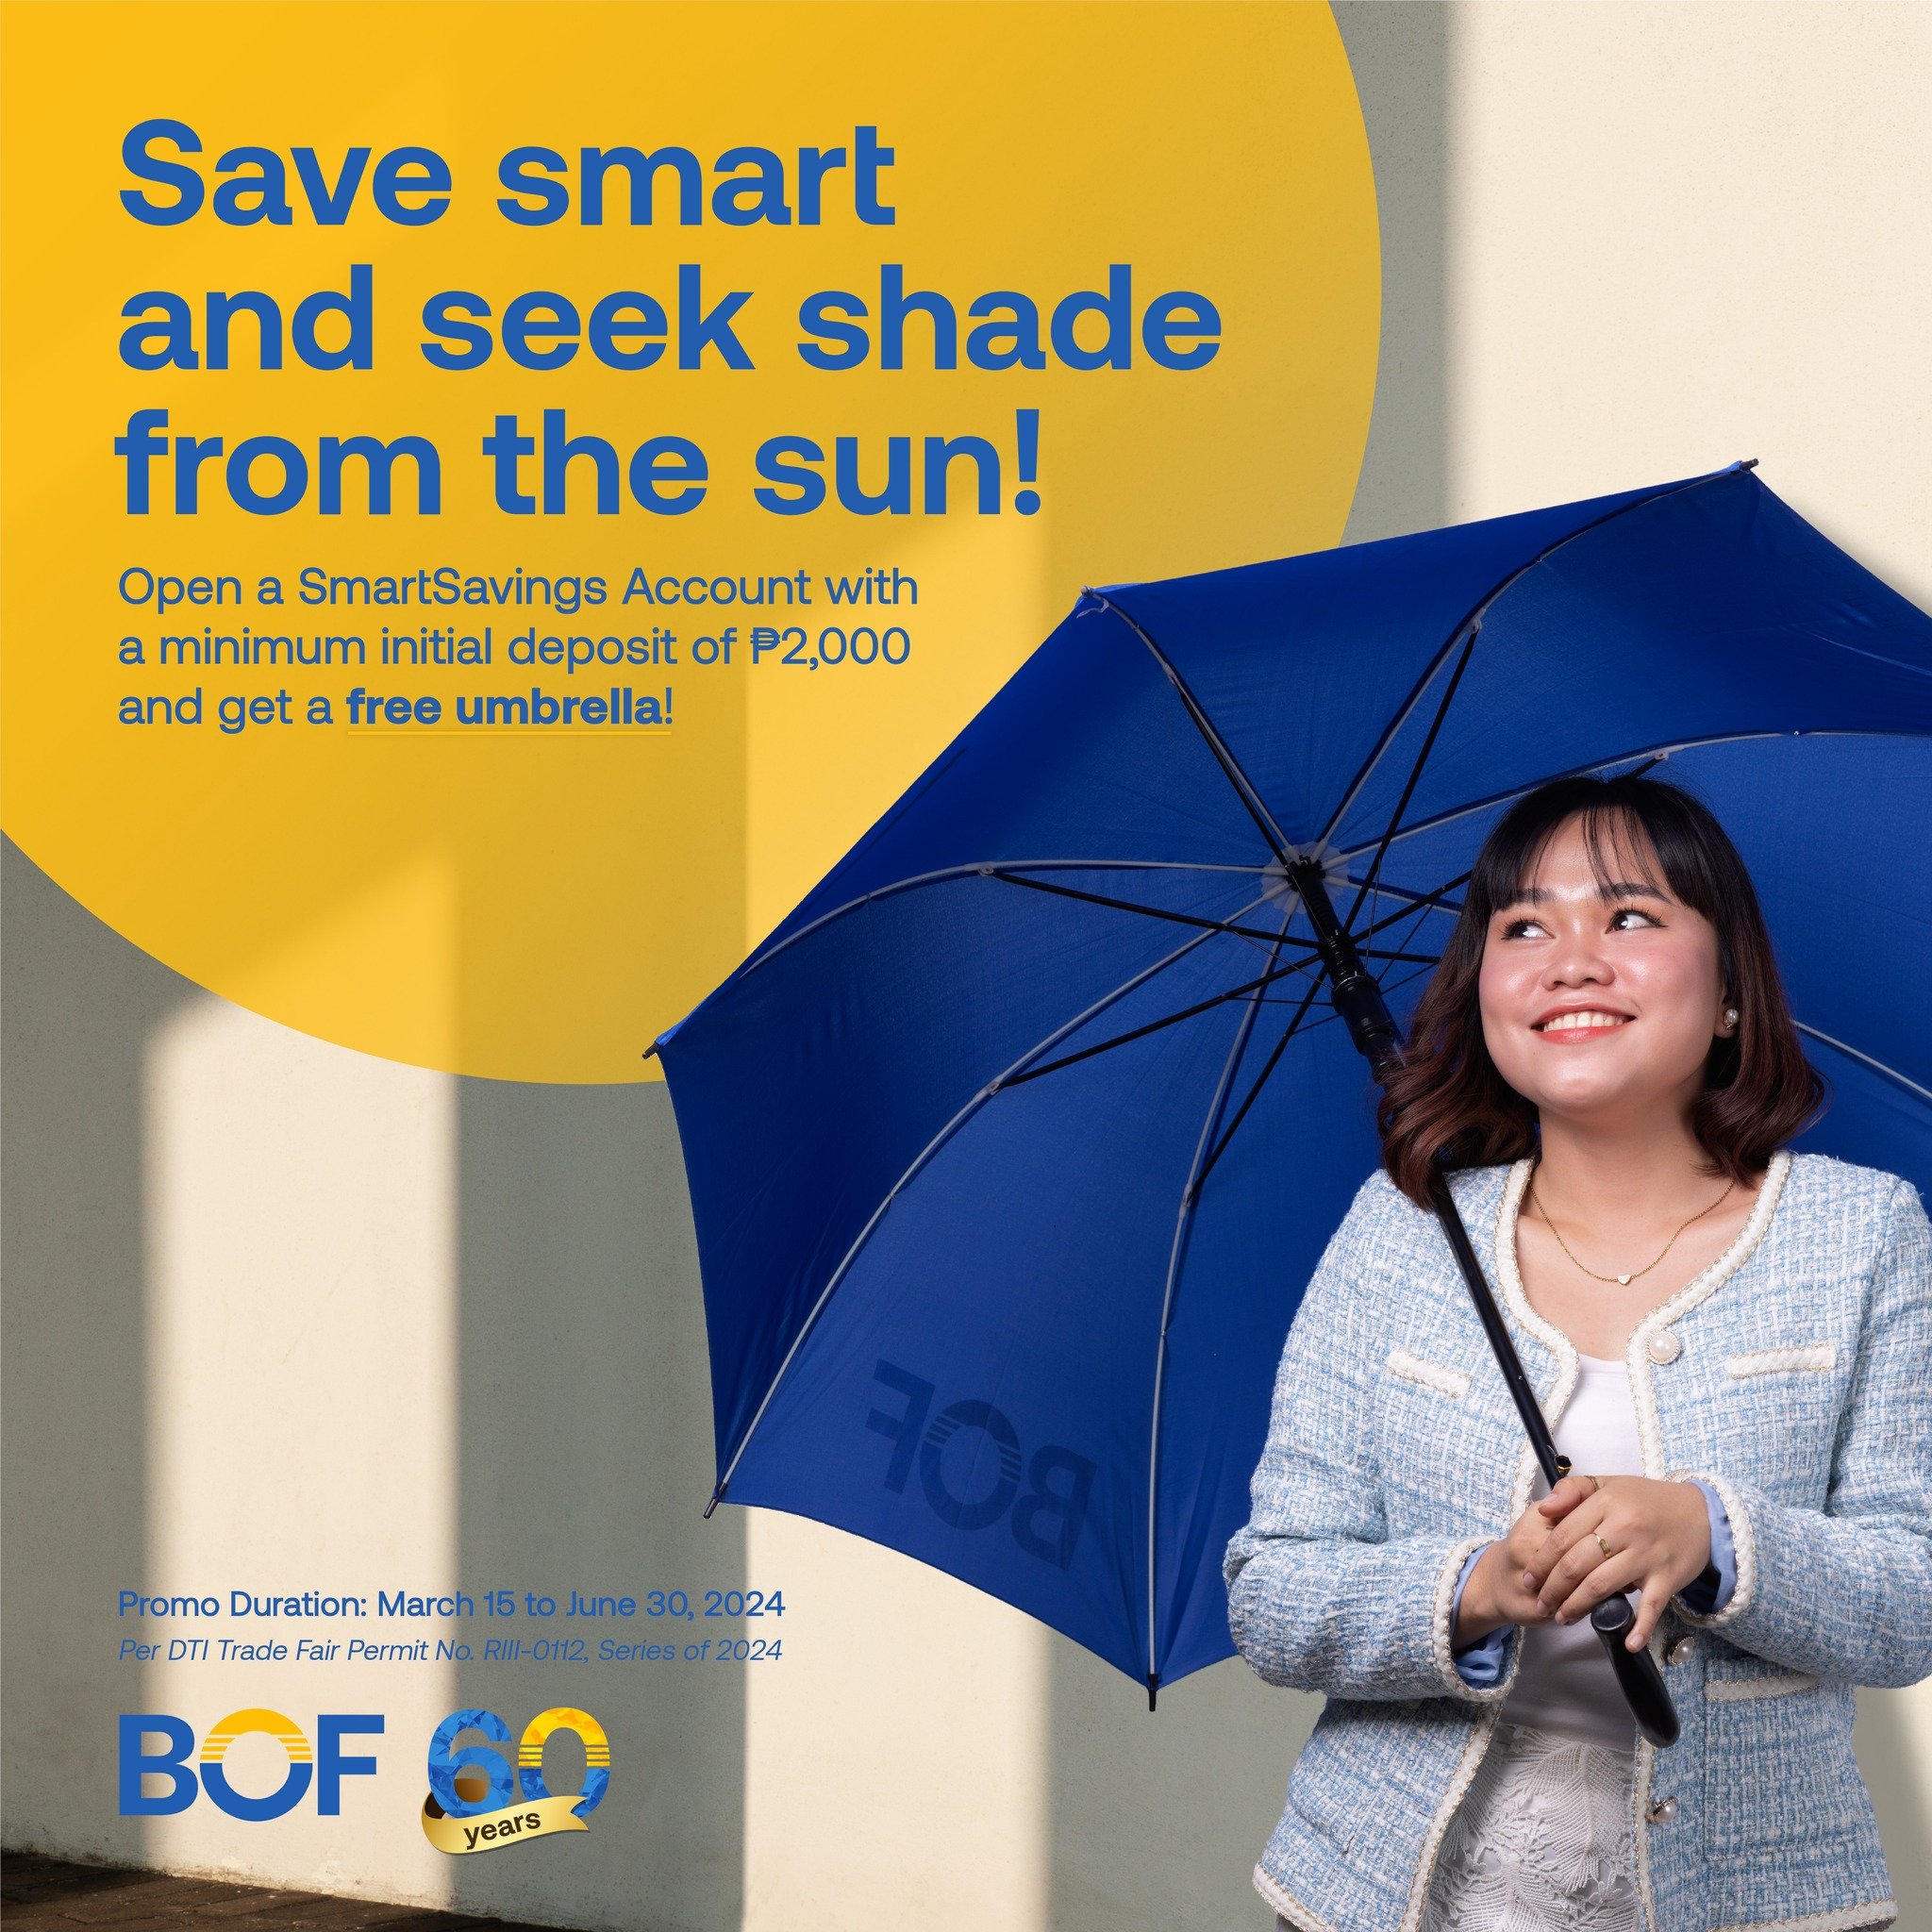 Don't let the sun burn a hole in your wallet! Open a SmartSavings Account today with a minimum deposit of P2,000 and snag a free umbrella! Limited time offer, so don't miss out! 

Visit your nearest BOF branch now!
https://www.bof.com.ph/branches

#B